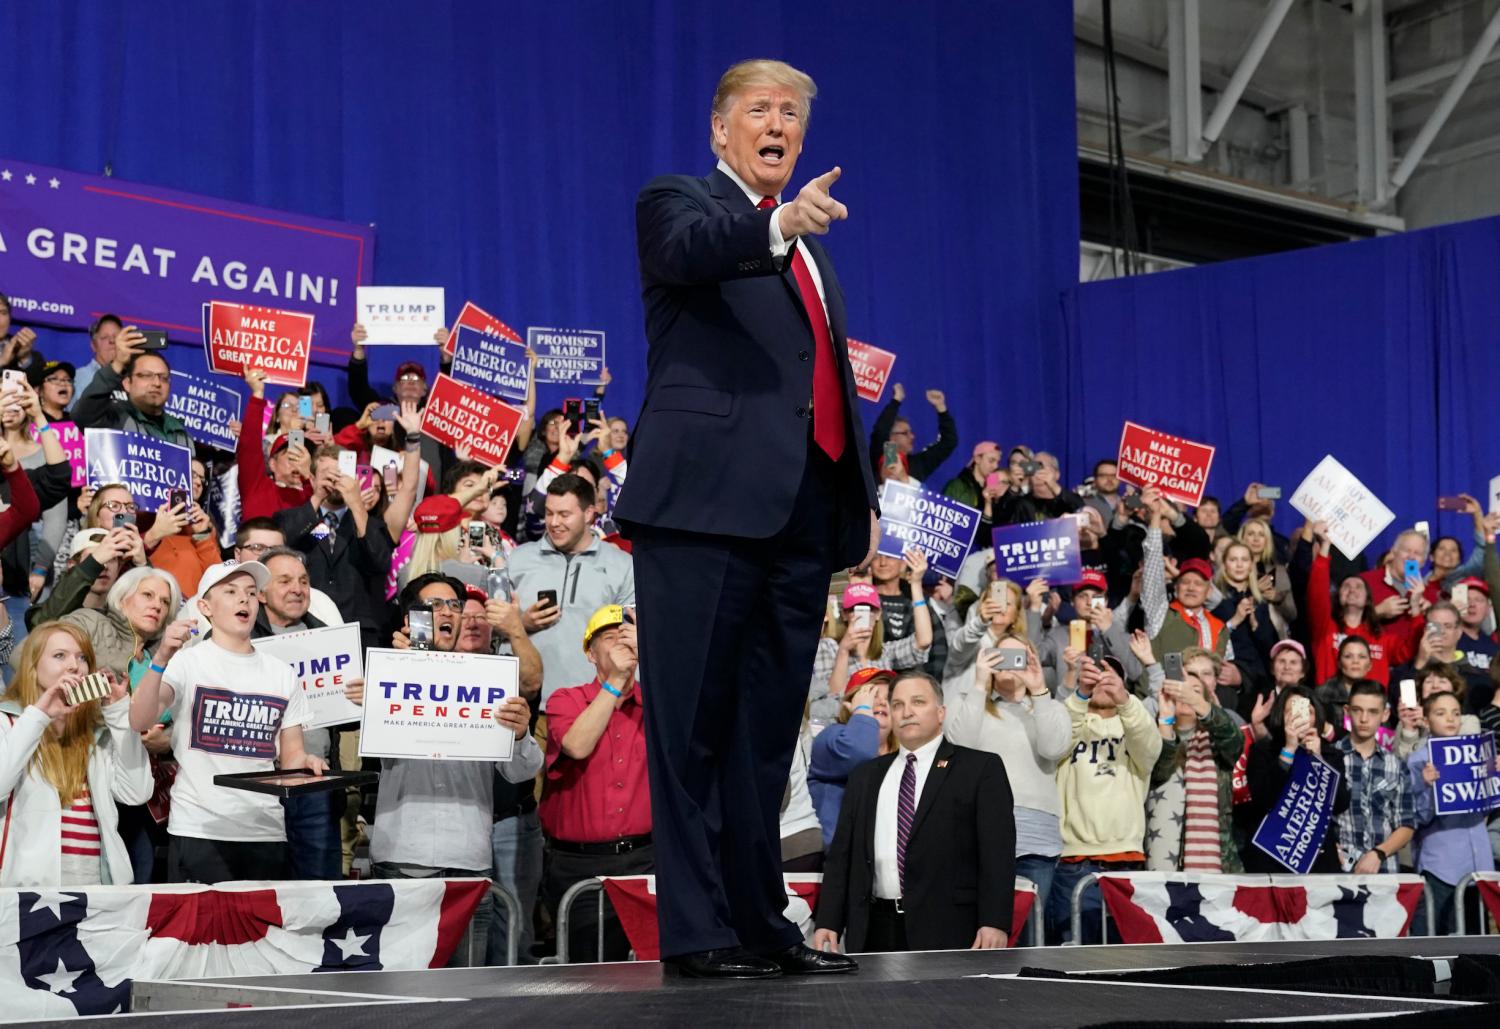 U.S. President Donald Trump points at supporters after speaking in support of Republican congressional candidate Rick Saccone during a Make America Great Again rally in Moon Township, Pennsylvania, U.S., March 10, 2018. REUTERS/Joshua Roberts - HP1EE3B05DFC5